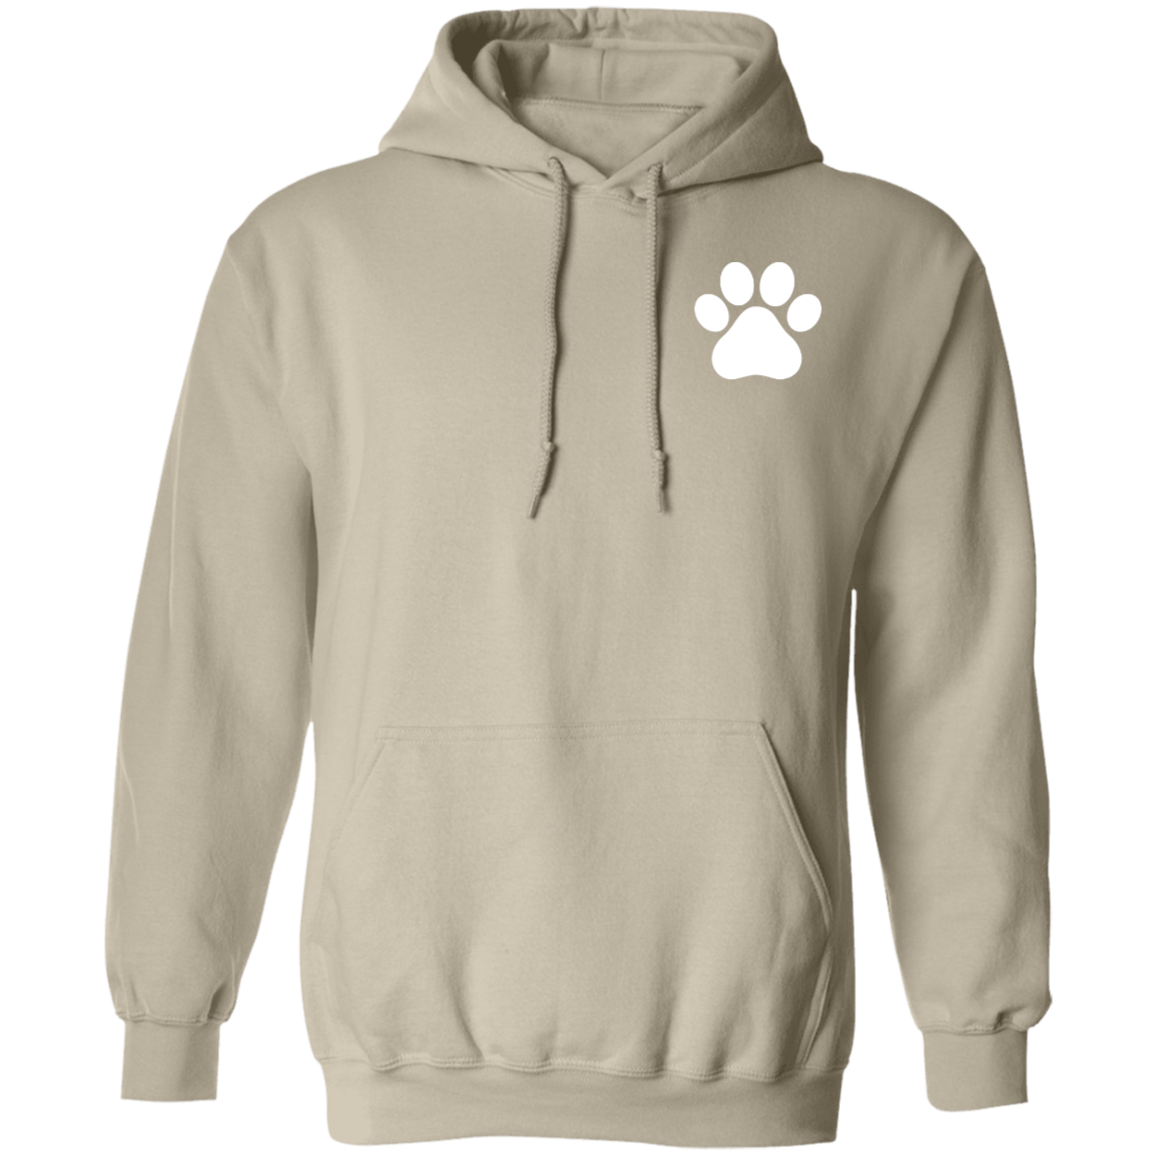 Dog Lovers, Gifts for Dog Dad, Dog Mom, Hoodie, Zip Up Jacket, Sweatpants, T-Shirts